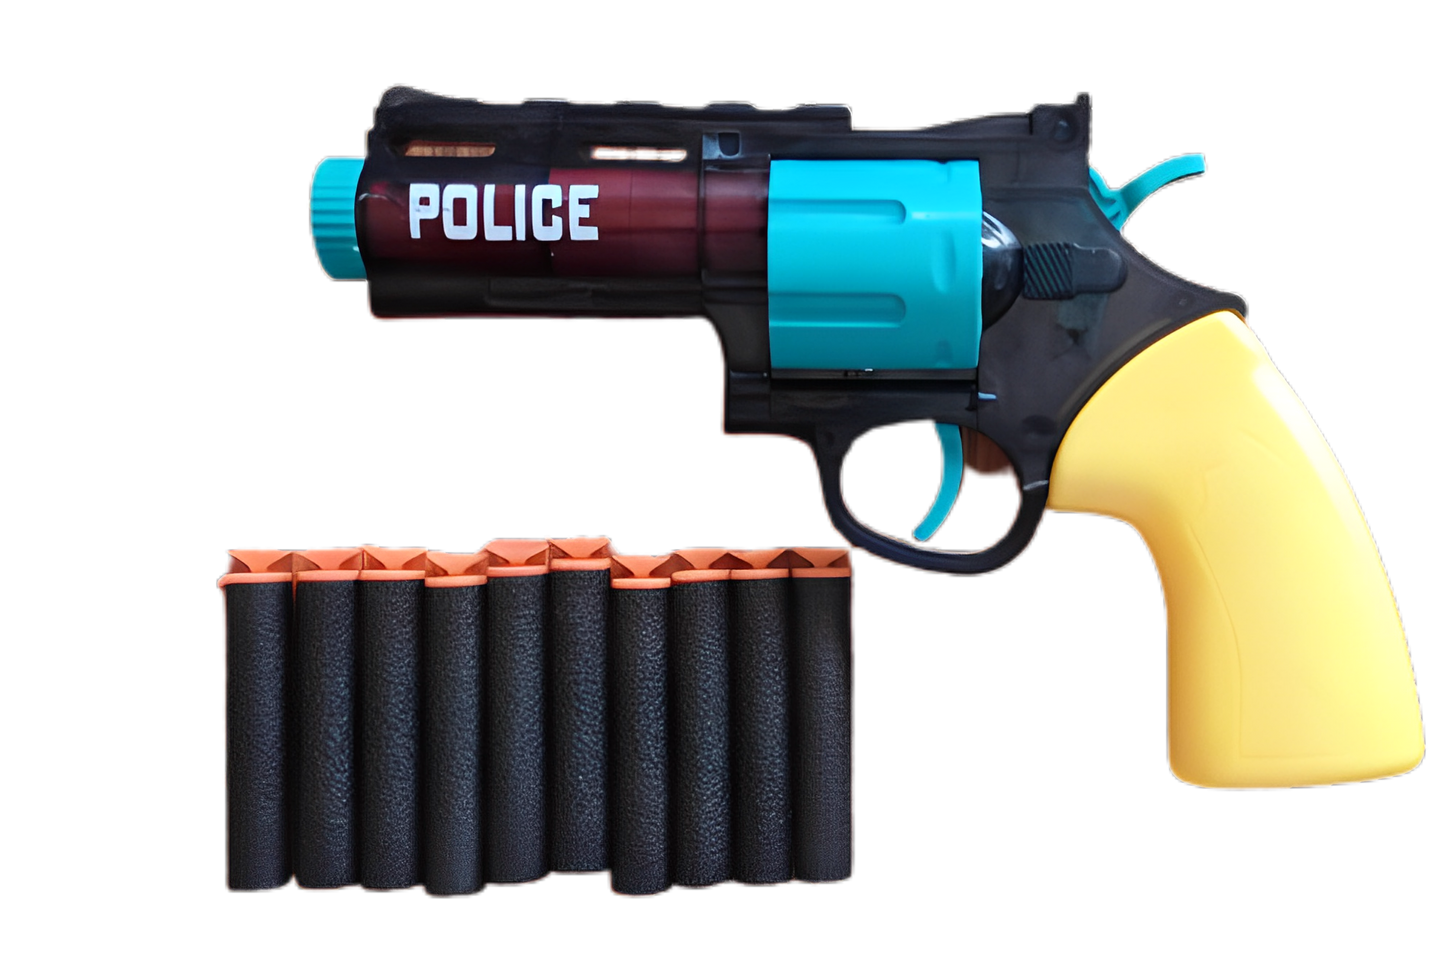 Police Officer Roleplay, Police Role Play Toy Game Set With Handcuffs, Police Badge, And 2-in-1 Soft Bullet Gun And Water Gun